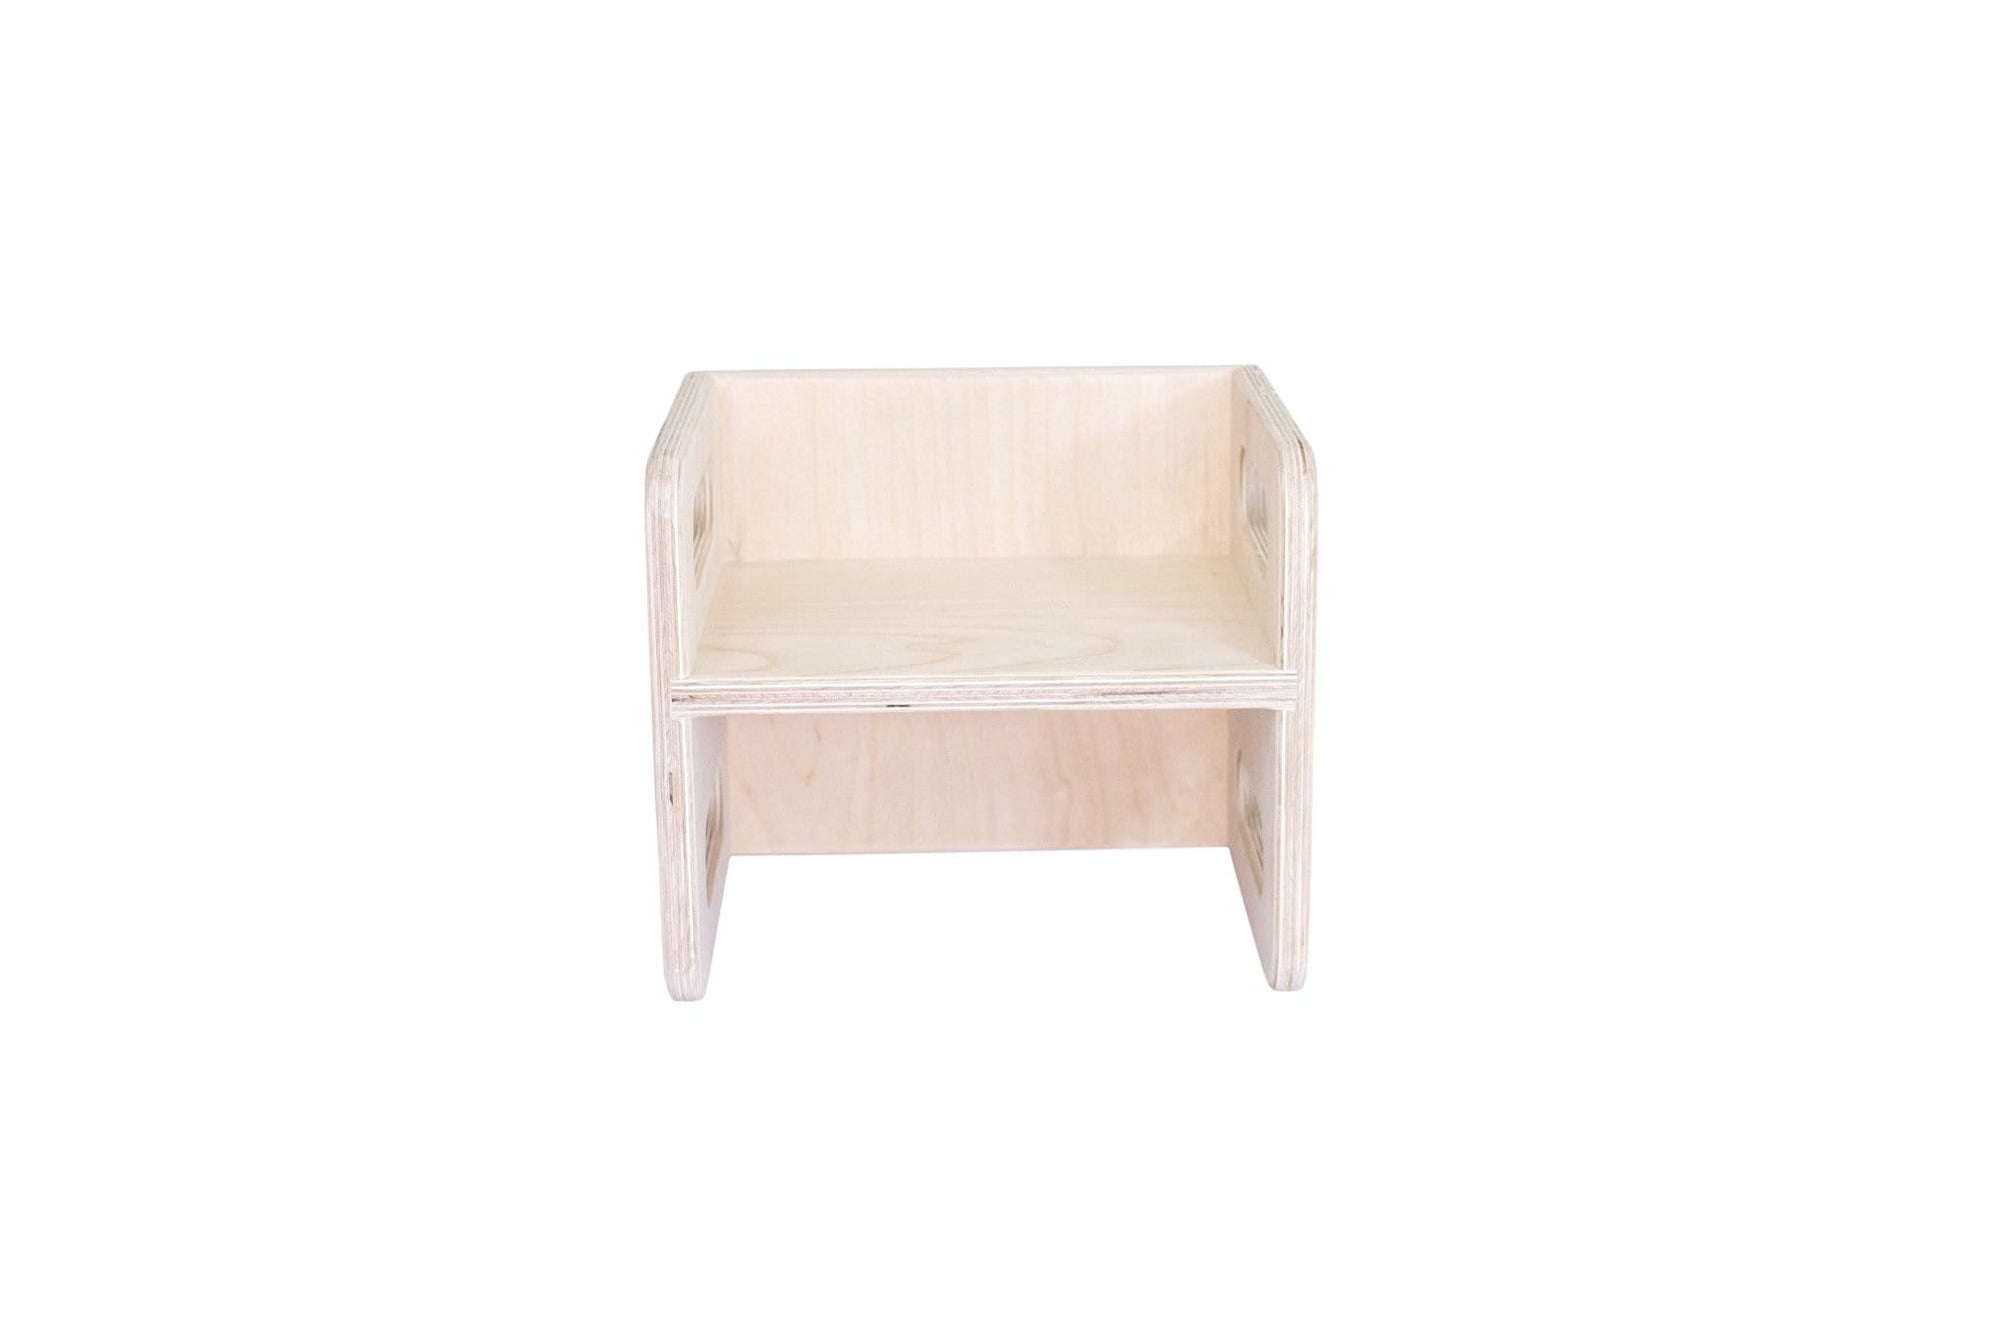 Cube Chair, Stool, and Table - The Montessori Room JL Wood working shop Made in canada